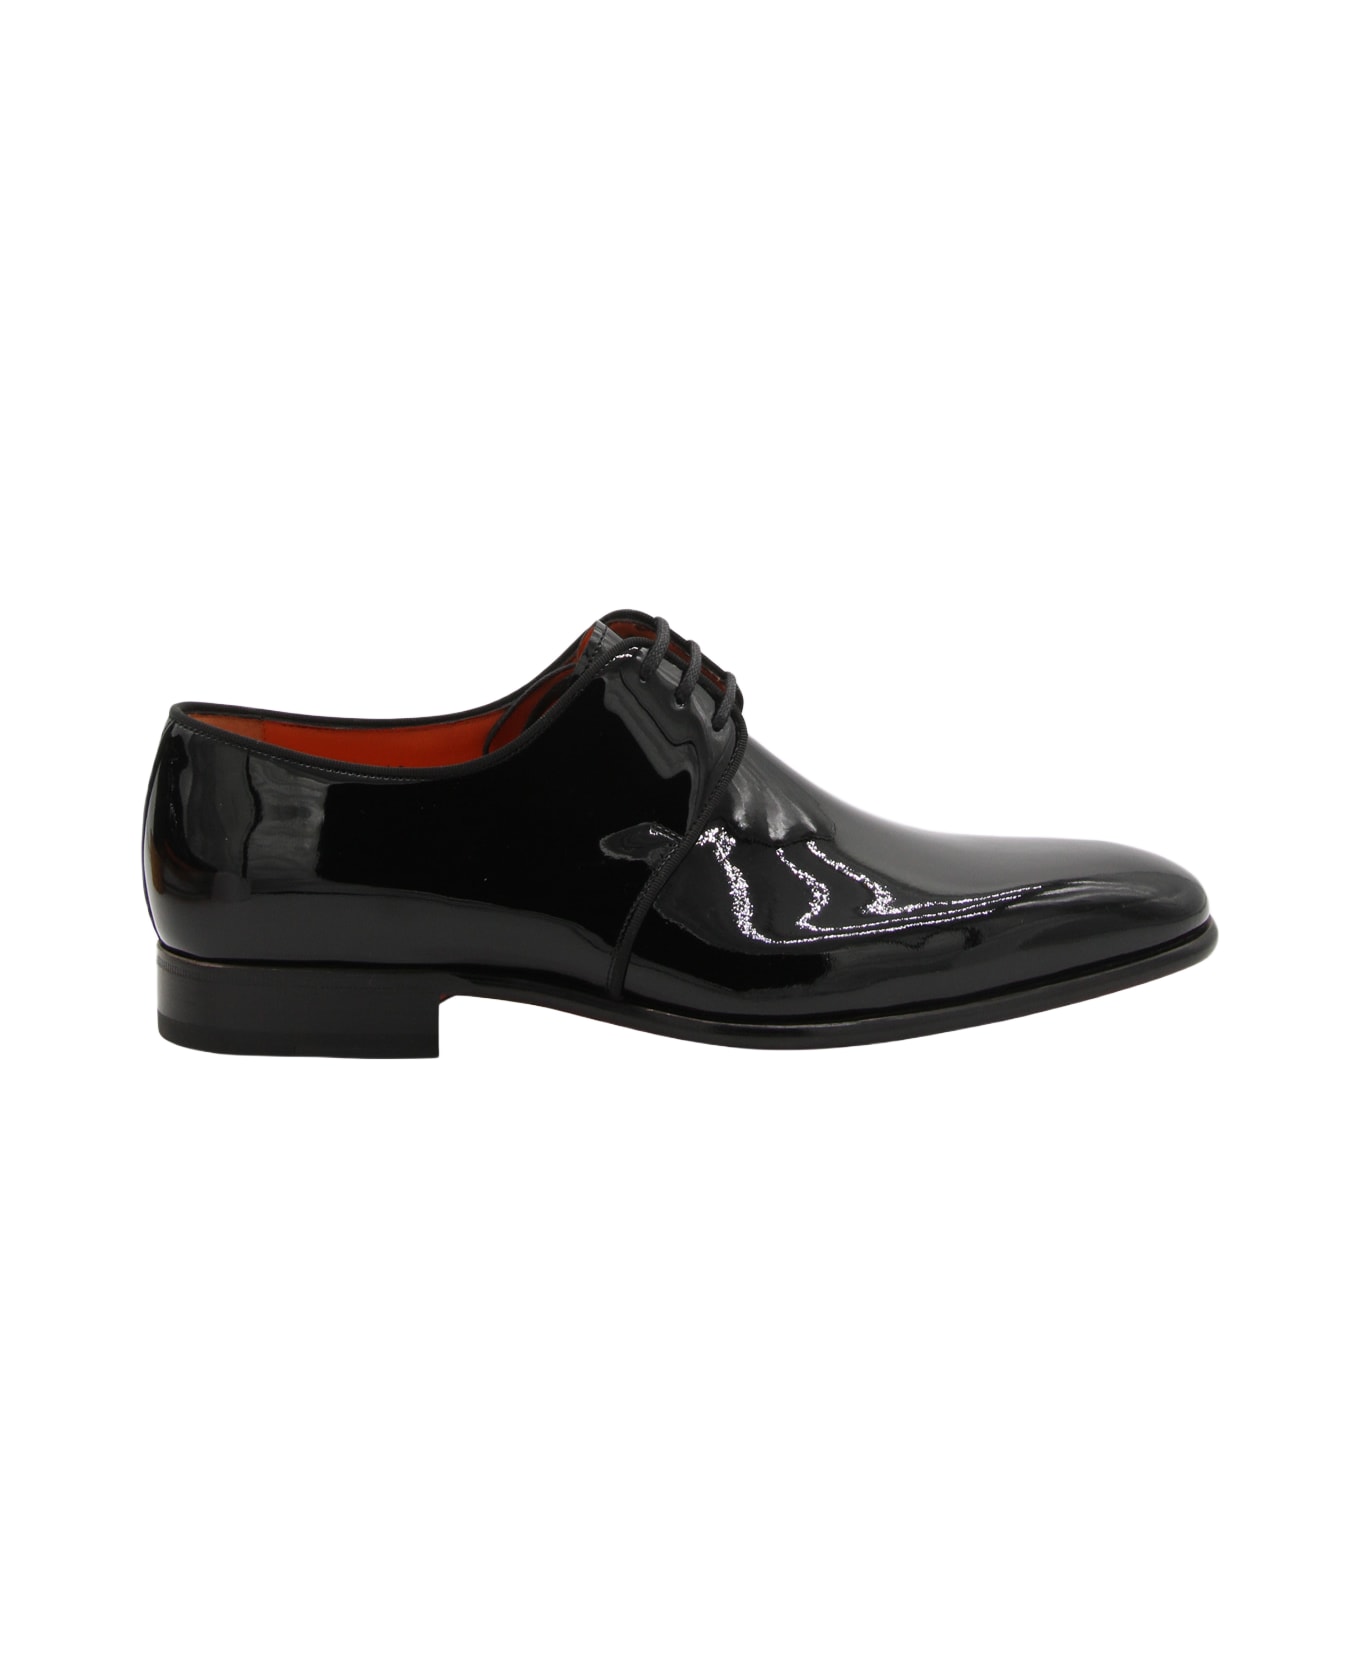 Santoni Black Leather Vynil Lace Up Shoes - Black ローファー＆デッキシューズ